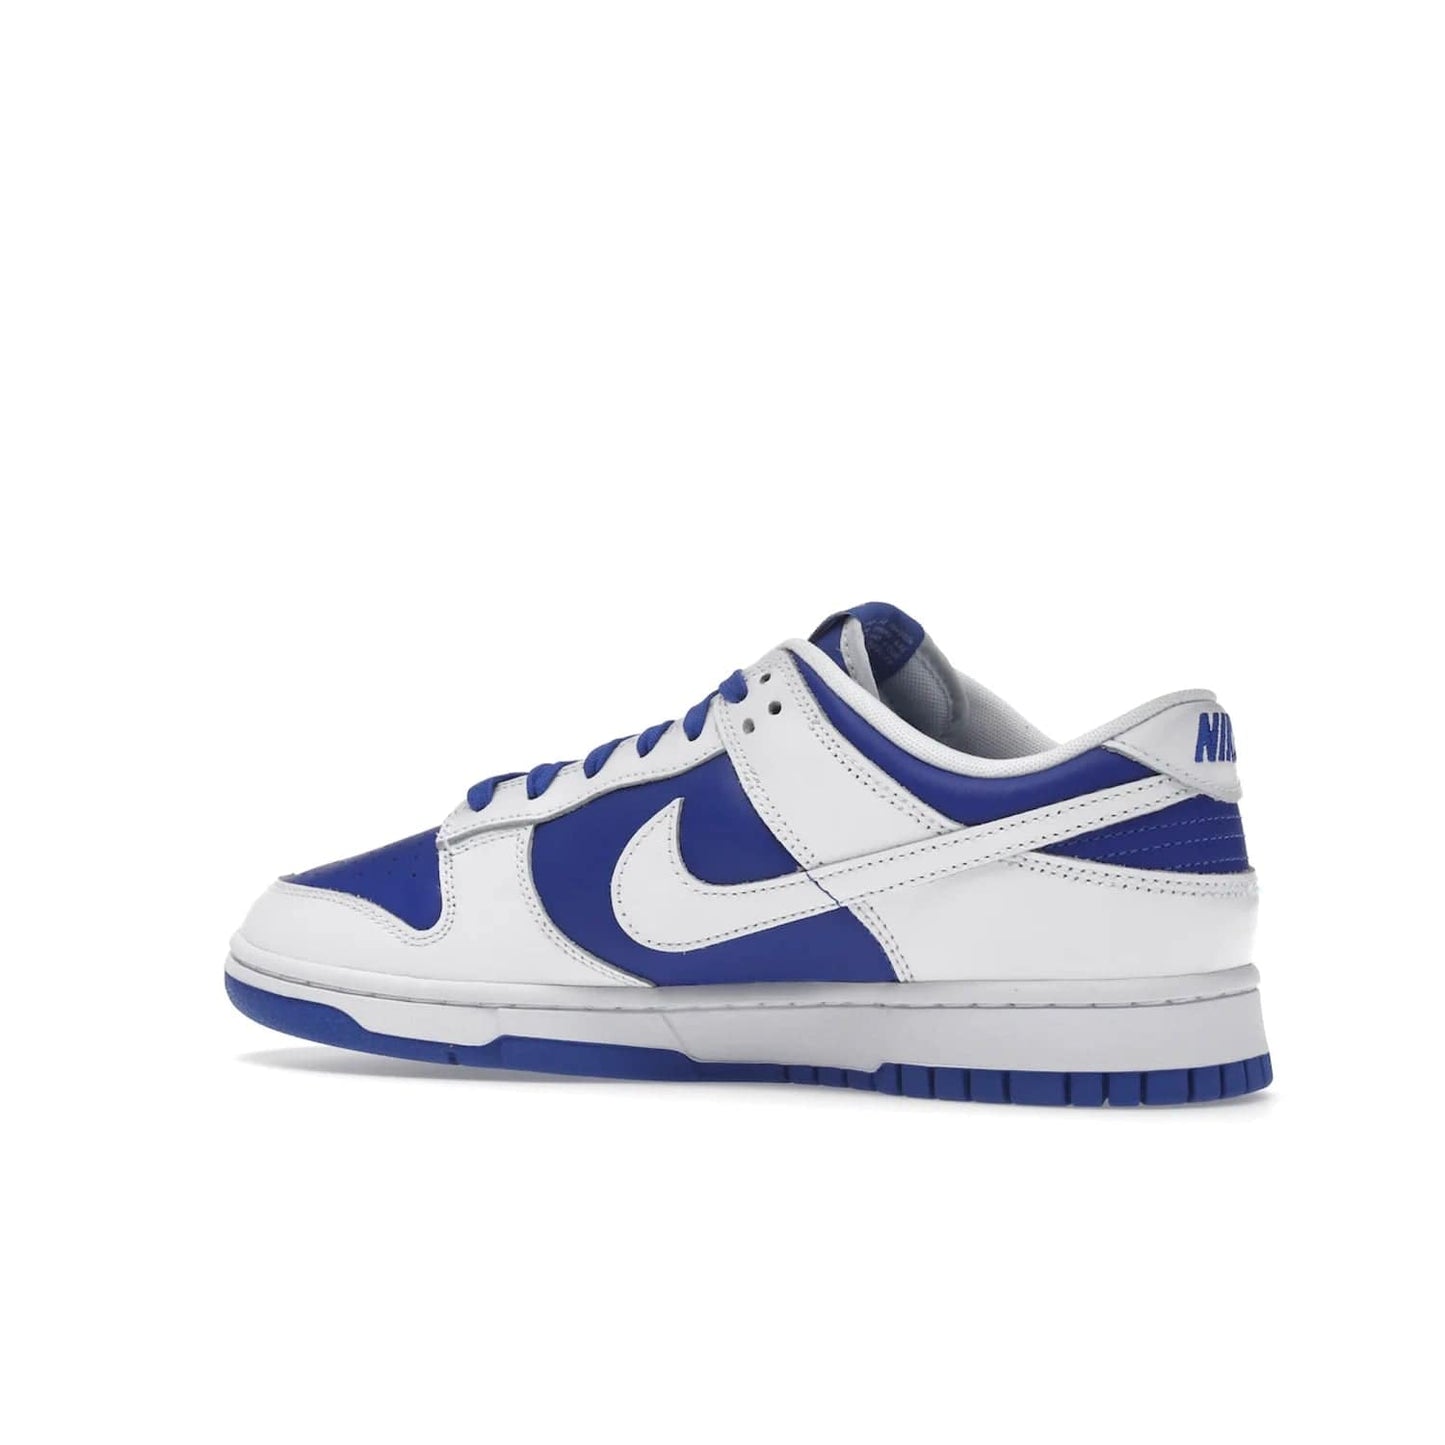 Nike Dunk Low Racer Blue White - Image 22 - Only at www.BallersClubKickz.com - Sleek Racer Blue leather upper and white leather overlays make up the Nike Dunk Low Racer Blue White. Woven tag and heel embroidery for a 1985 Dunk look with a matching EVA foam sole completes the classic colorway.